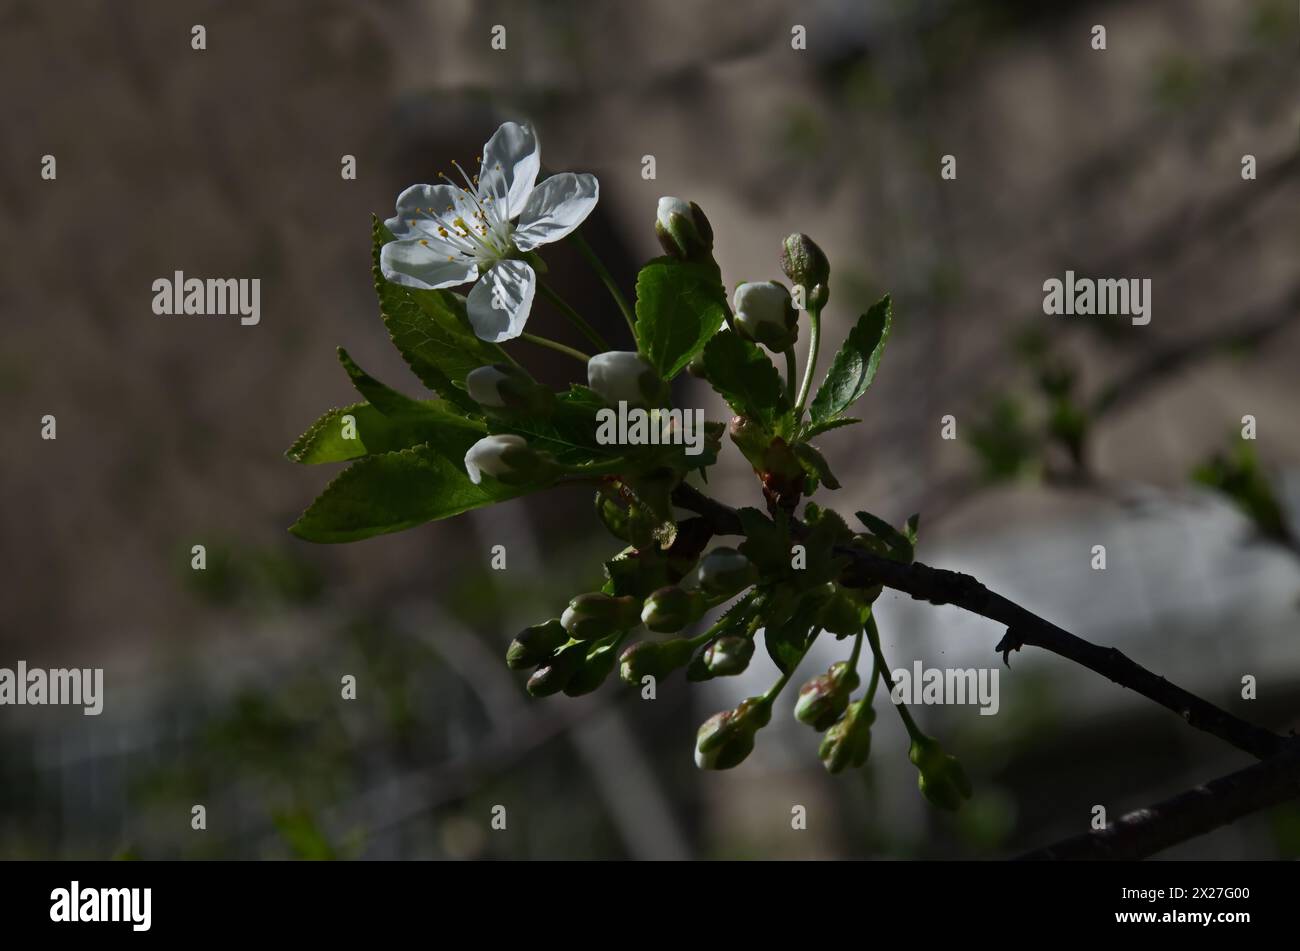 Branch with fresh sour cherry blossom or Prunus cerasus in the garden, Sofia, Bulgaria Stock Photo